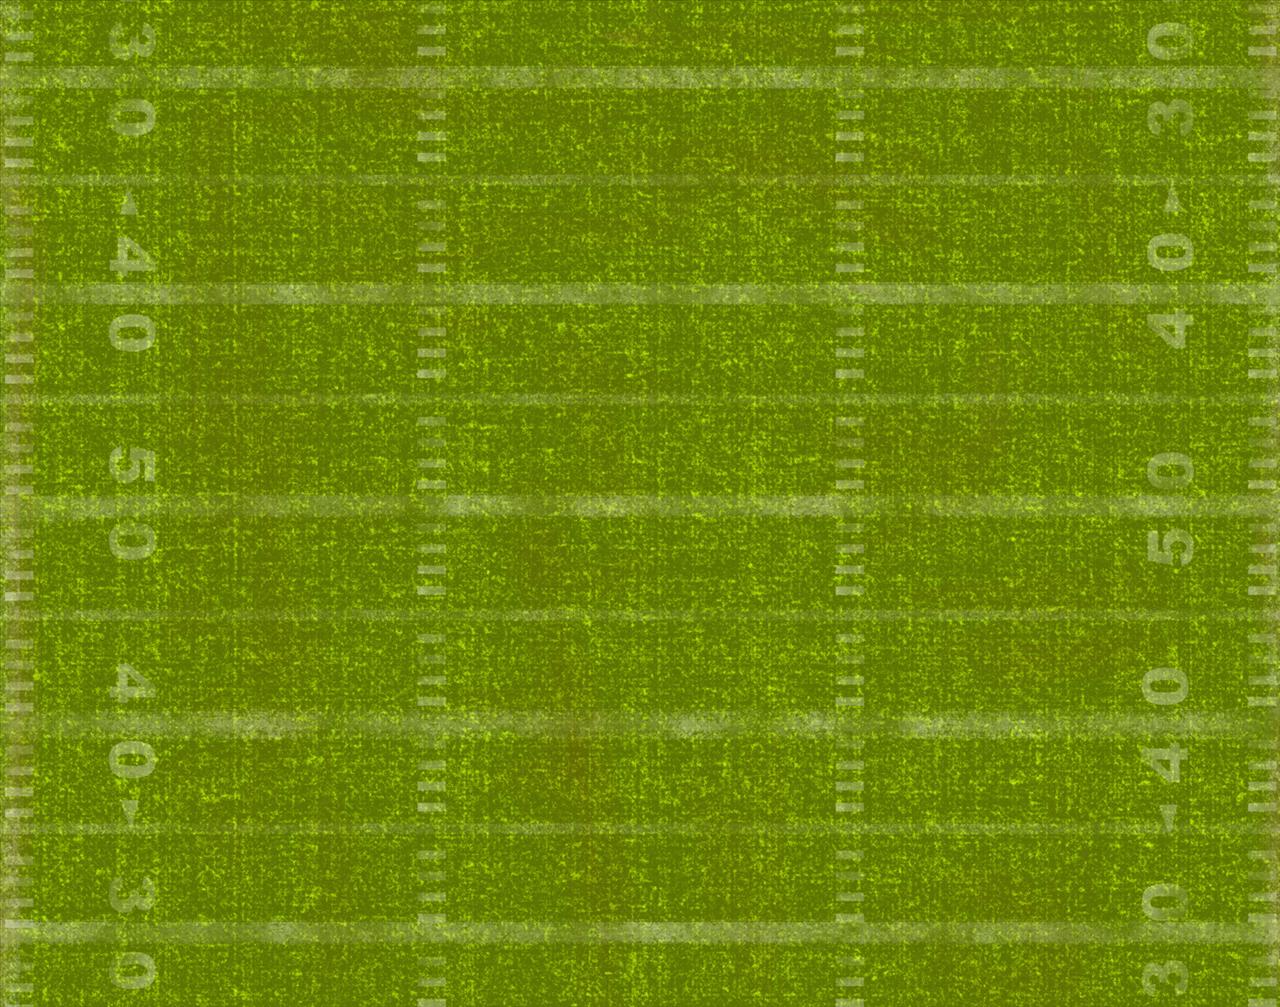 Football Field - Grungy Athlete Backgrounds powerpoint backgrounds